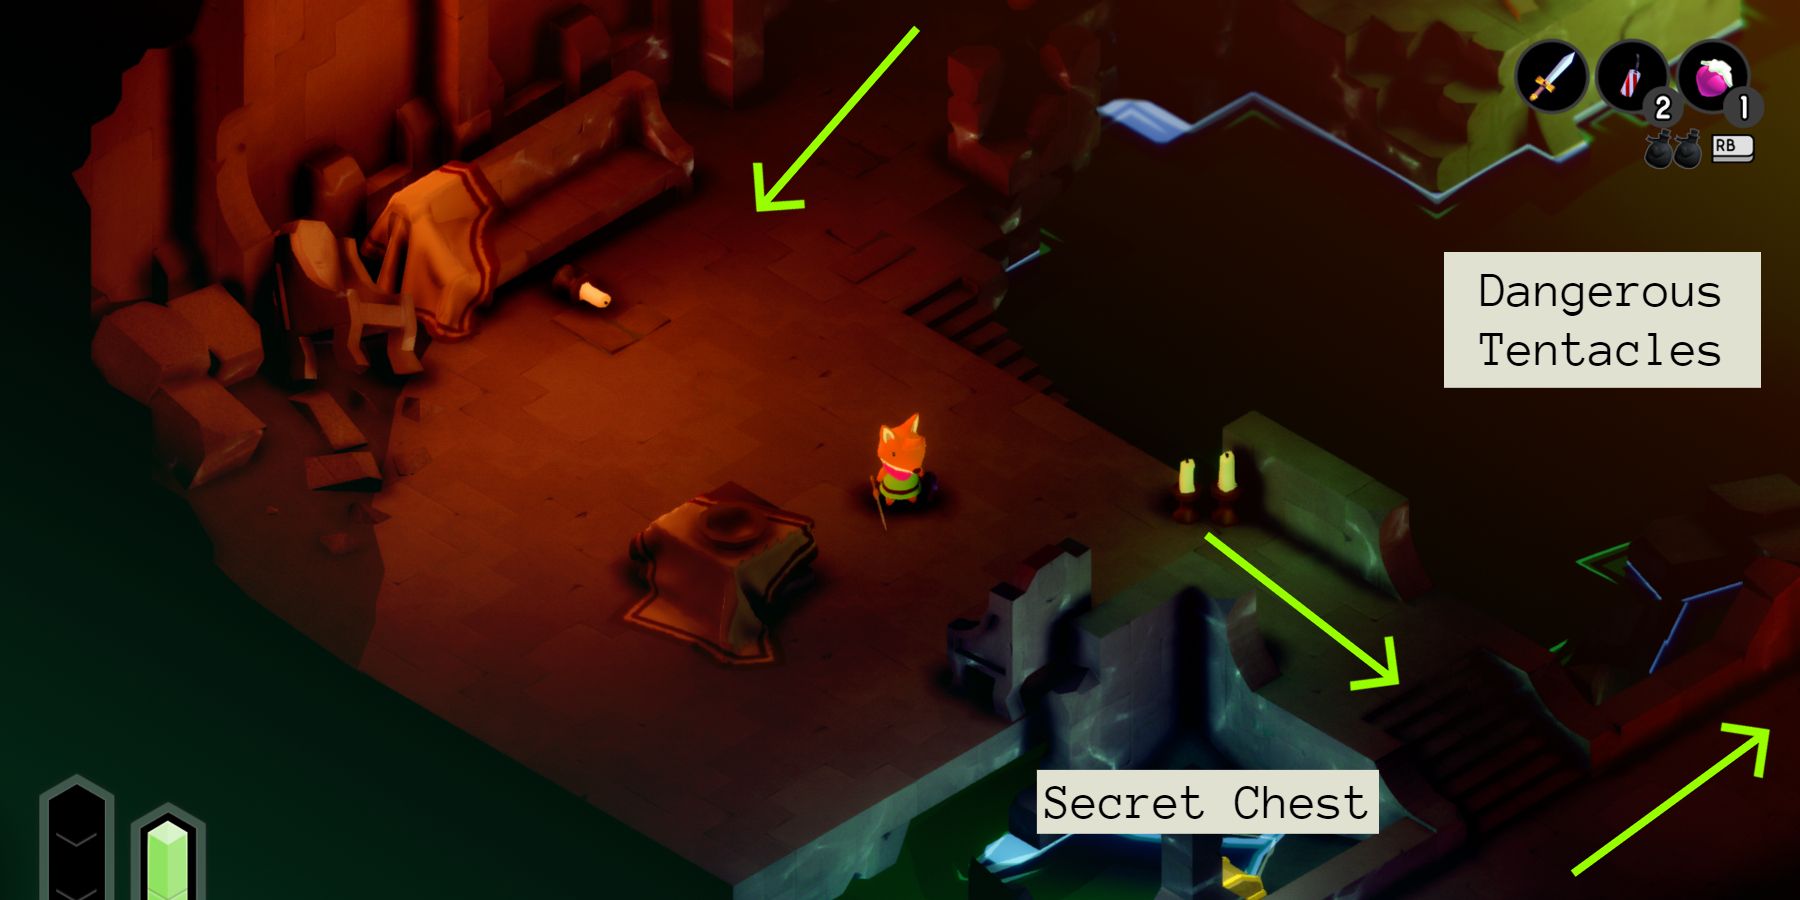 tunic in an underground chamber on a platform suspended over water, with green arrows pointing out a path that takes him forward and to the right. a box below the fox says "secret chest" over a barely visible treasure chest, and another box over the nearby water says "dangerous tentacles"